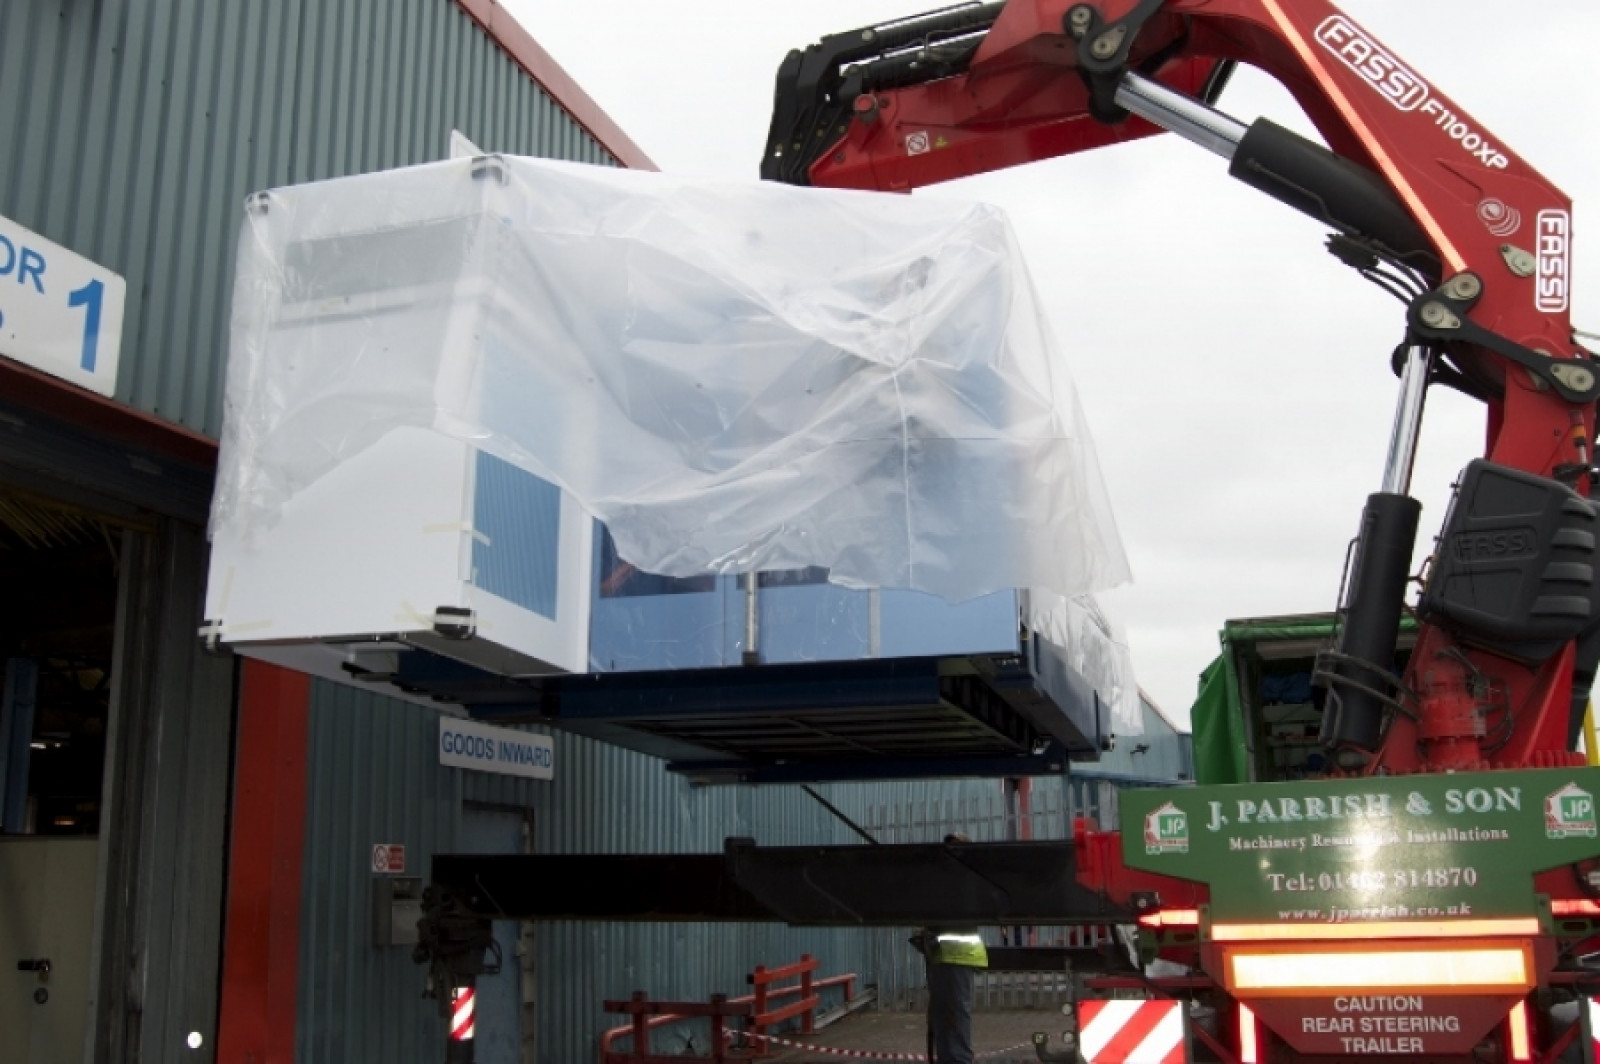 Arrival Of New Laser Machine Set To Increase Produ...